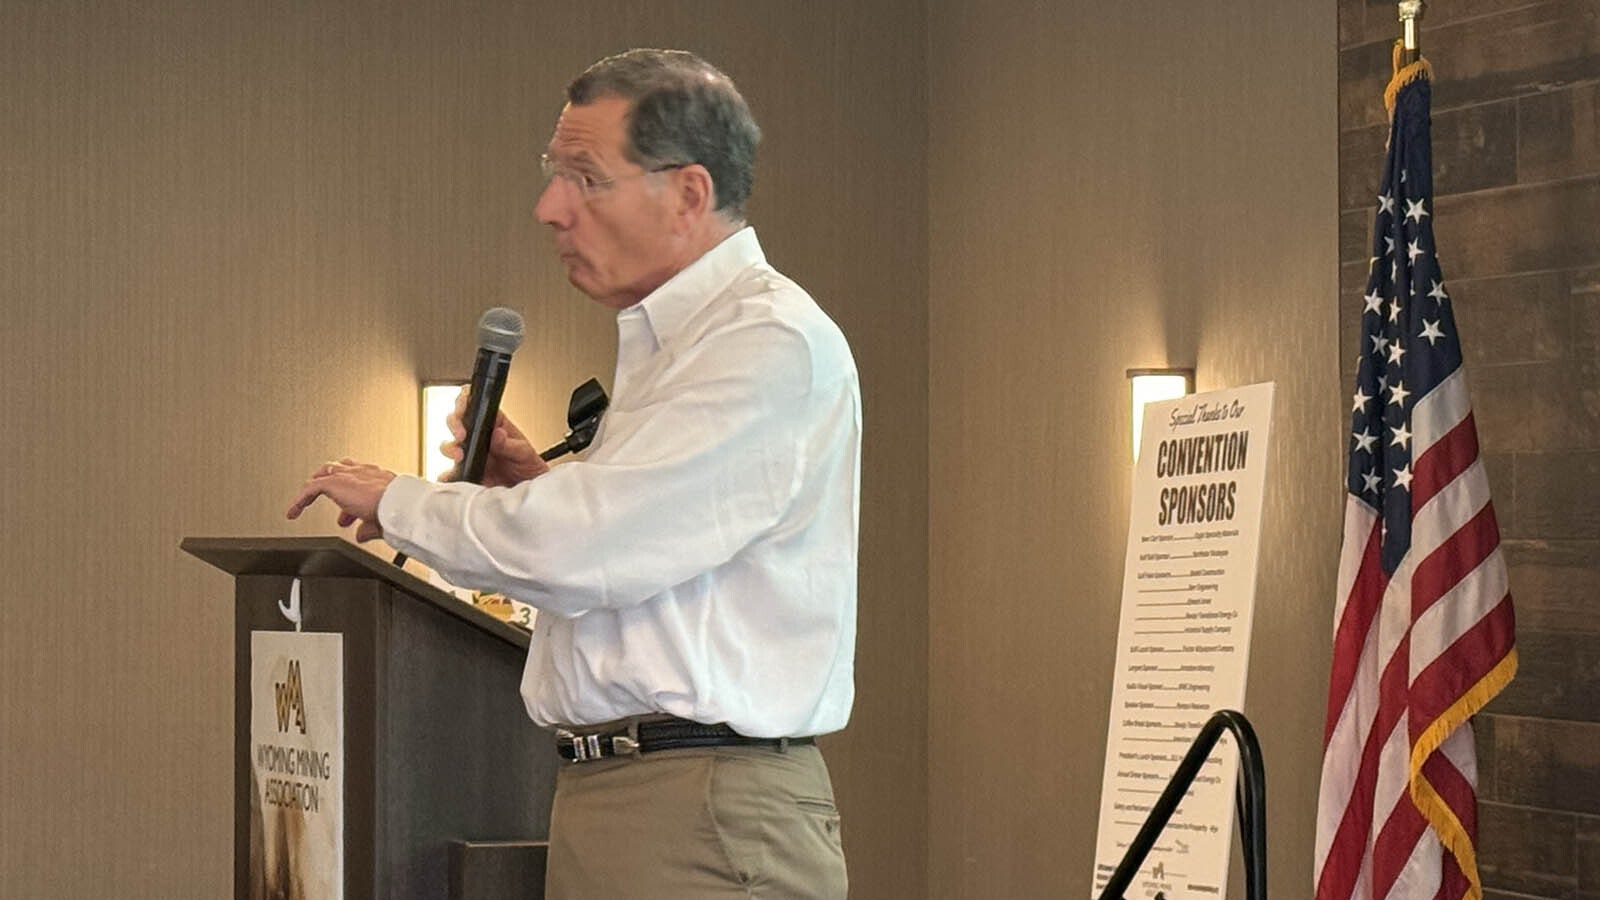 U.S. Sens. John Barrasso and Cynthia Lummis, both of whom are Republicans from Wyoming, blasted the Environmental Protection Agency and other federal agency rules that are designed to phase out coal and natural gas-fired plants. The lawmakers delivered their remarks at the Wyoming Mining Association’s annual convention in Cody on Friday.  Above, Barrasso stands at the podium as Lummis, seated second to the left in the first row, listens to Barrasso’s concerns about the Biden administration’s attack on Wyoming’s coal industry. Lummis said that plans are in the works to reverse the EPA’s efforts to end coal and another controversial rule being crafted by the Bureau of Land Management that would stop coal leasing on public lands by 2041. “We’re going to be in a position to turn this thing around” in the first six months of a new administration, she said.